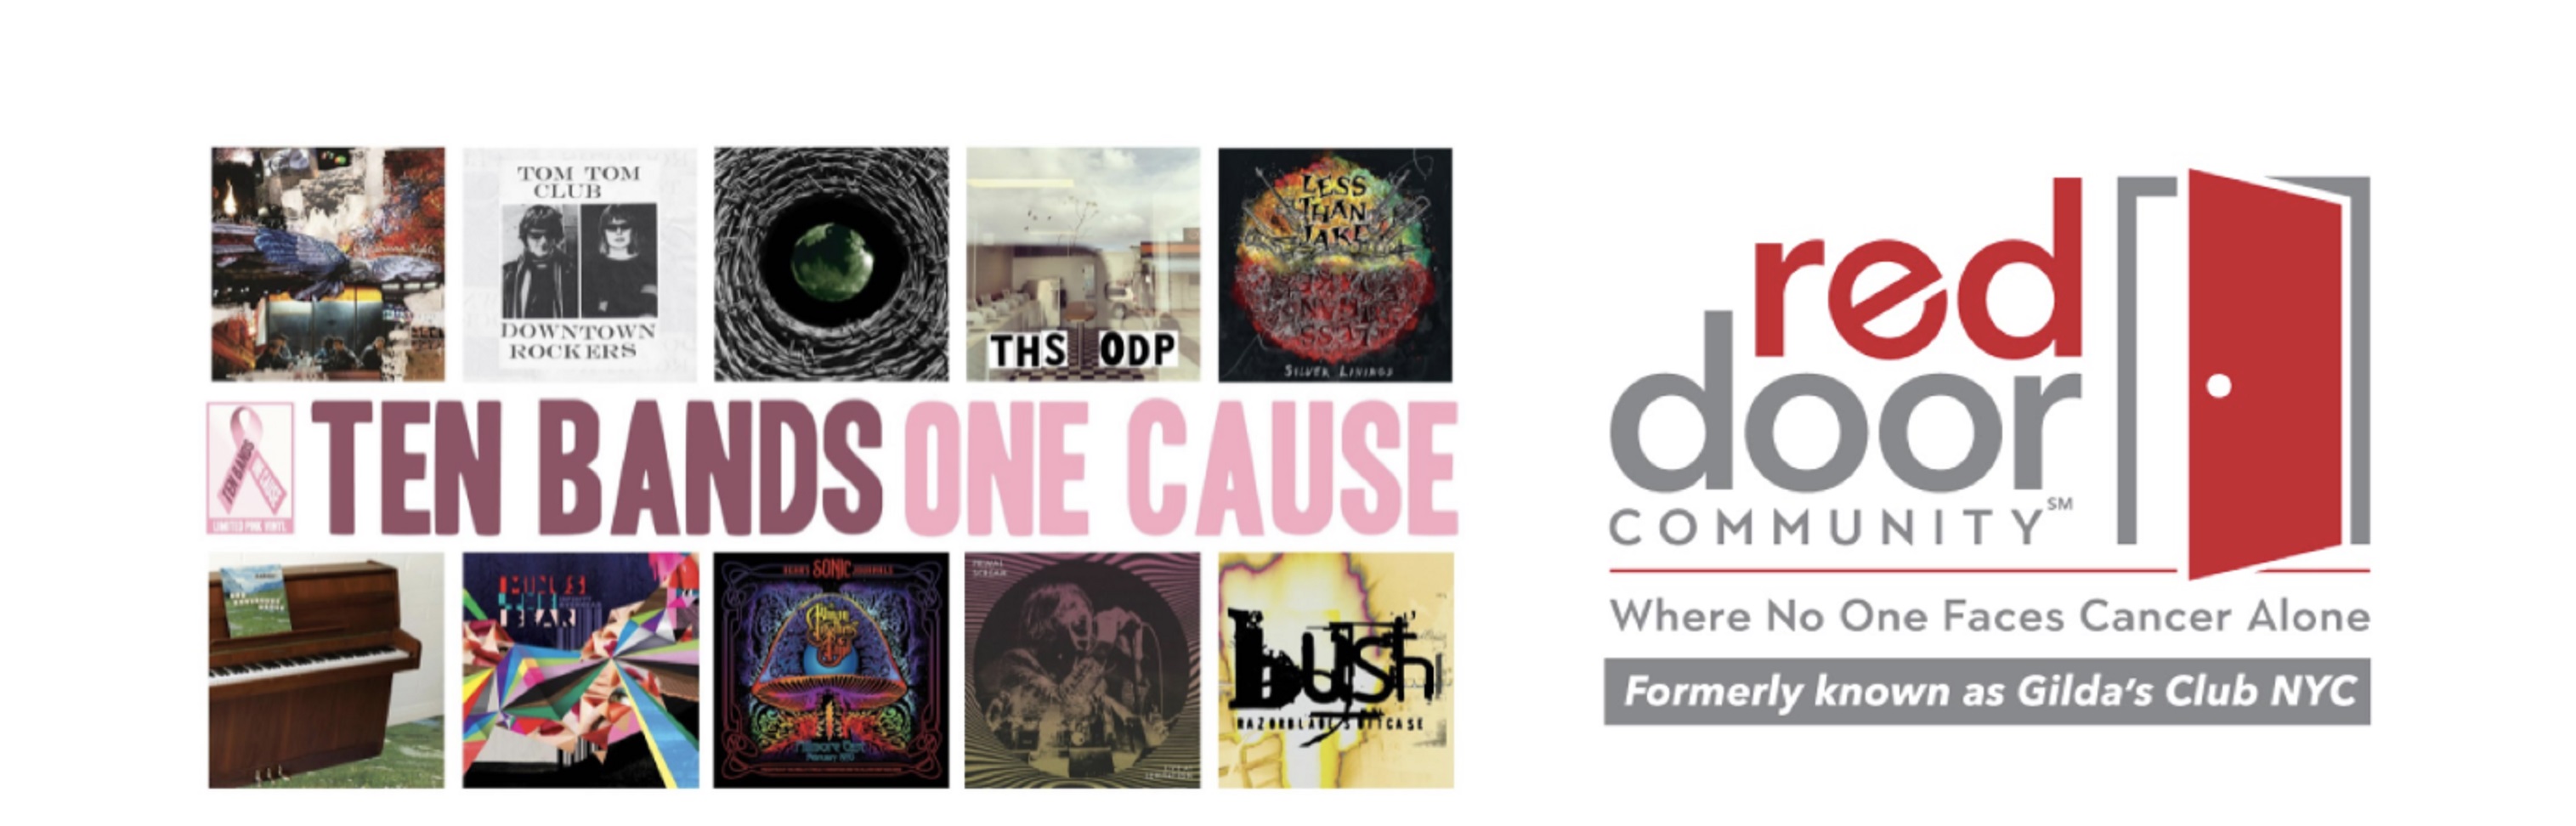 Ten Bands One Cause Announces 2021 Vinyl Lineup of Albums Benefitting Red Door Community